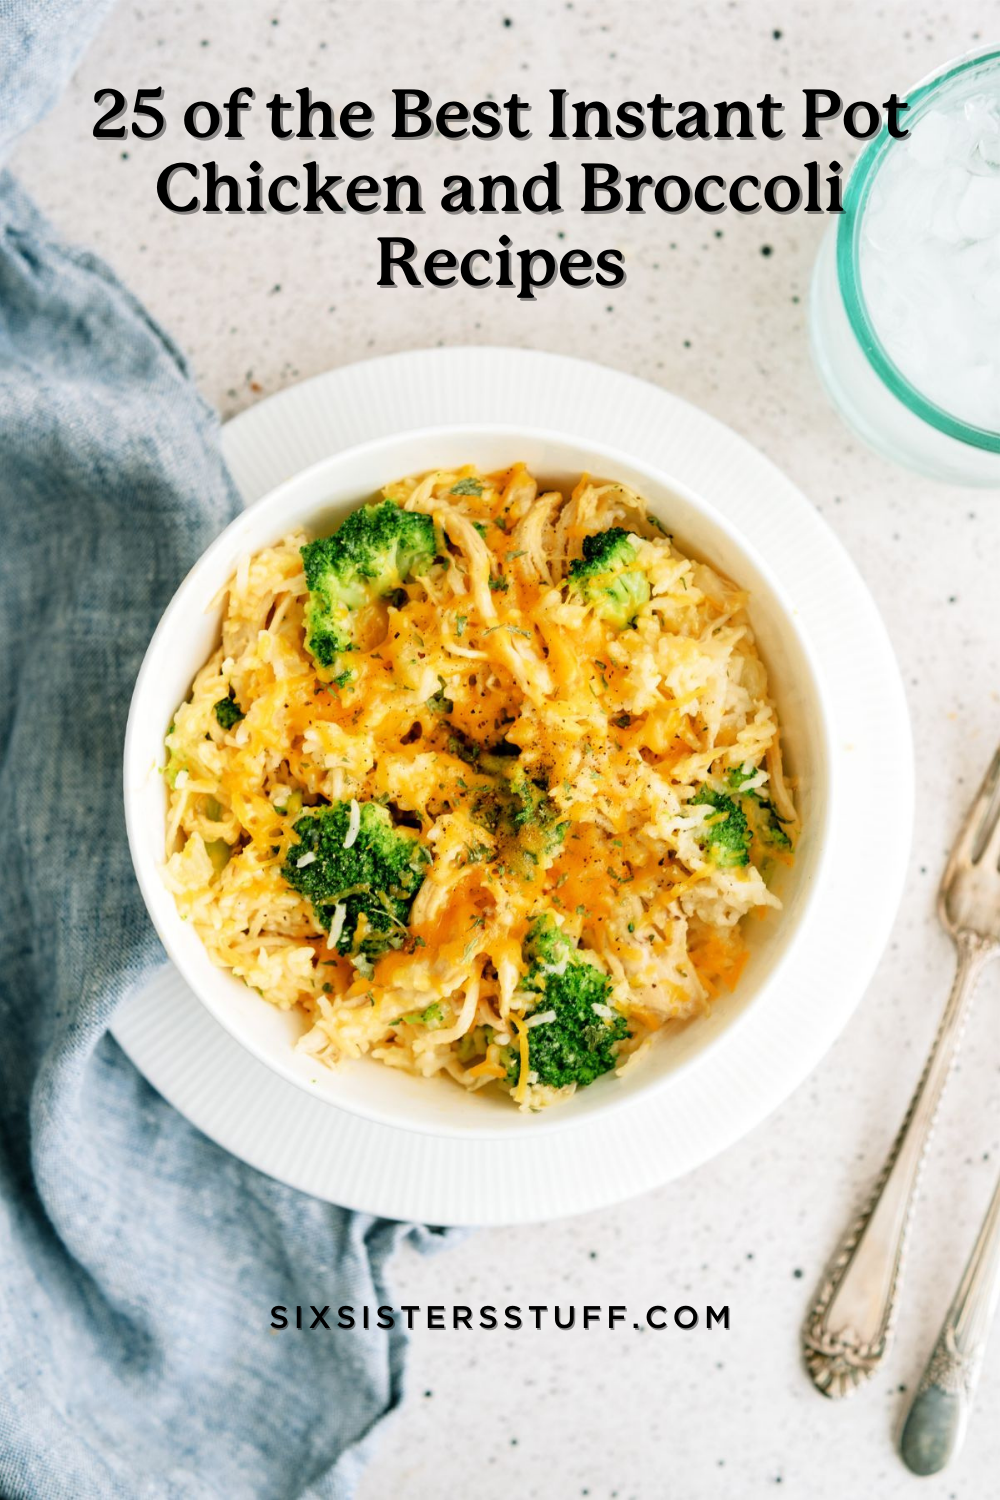 25 of the Best Instant Pot Chicken and Broccoli Recipes